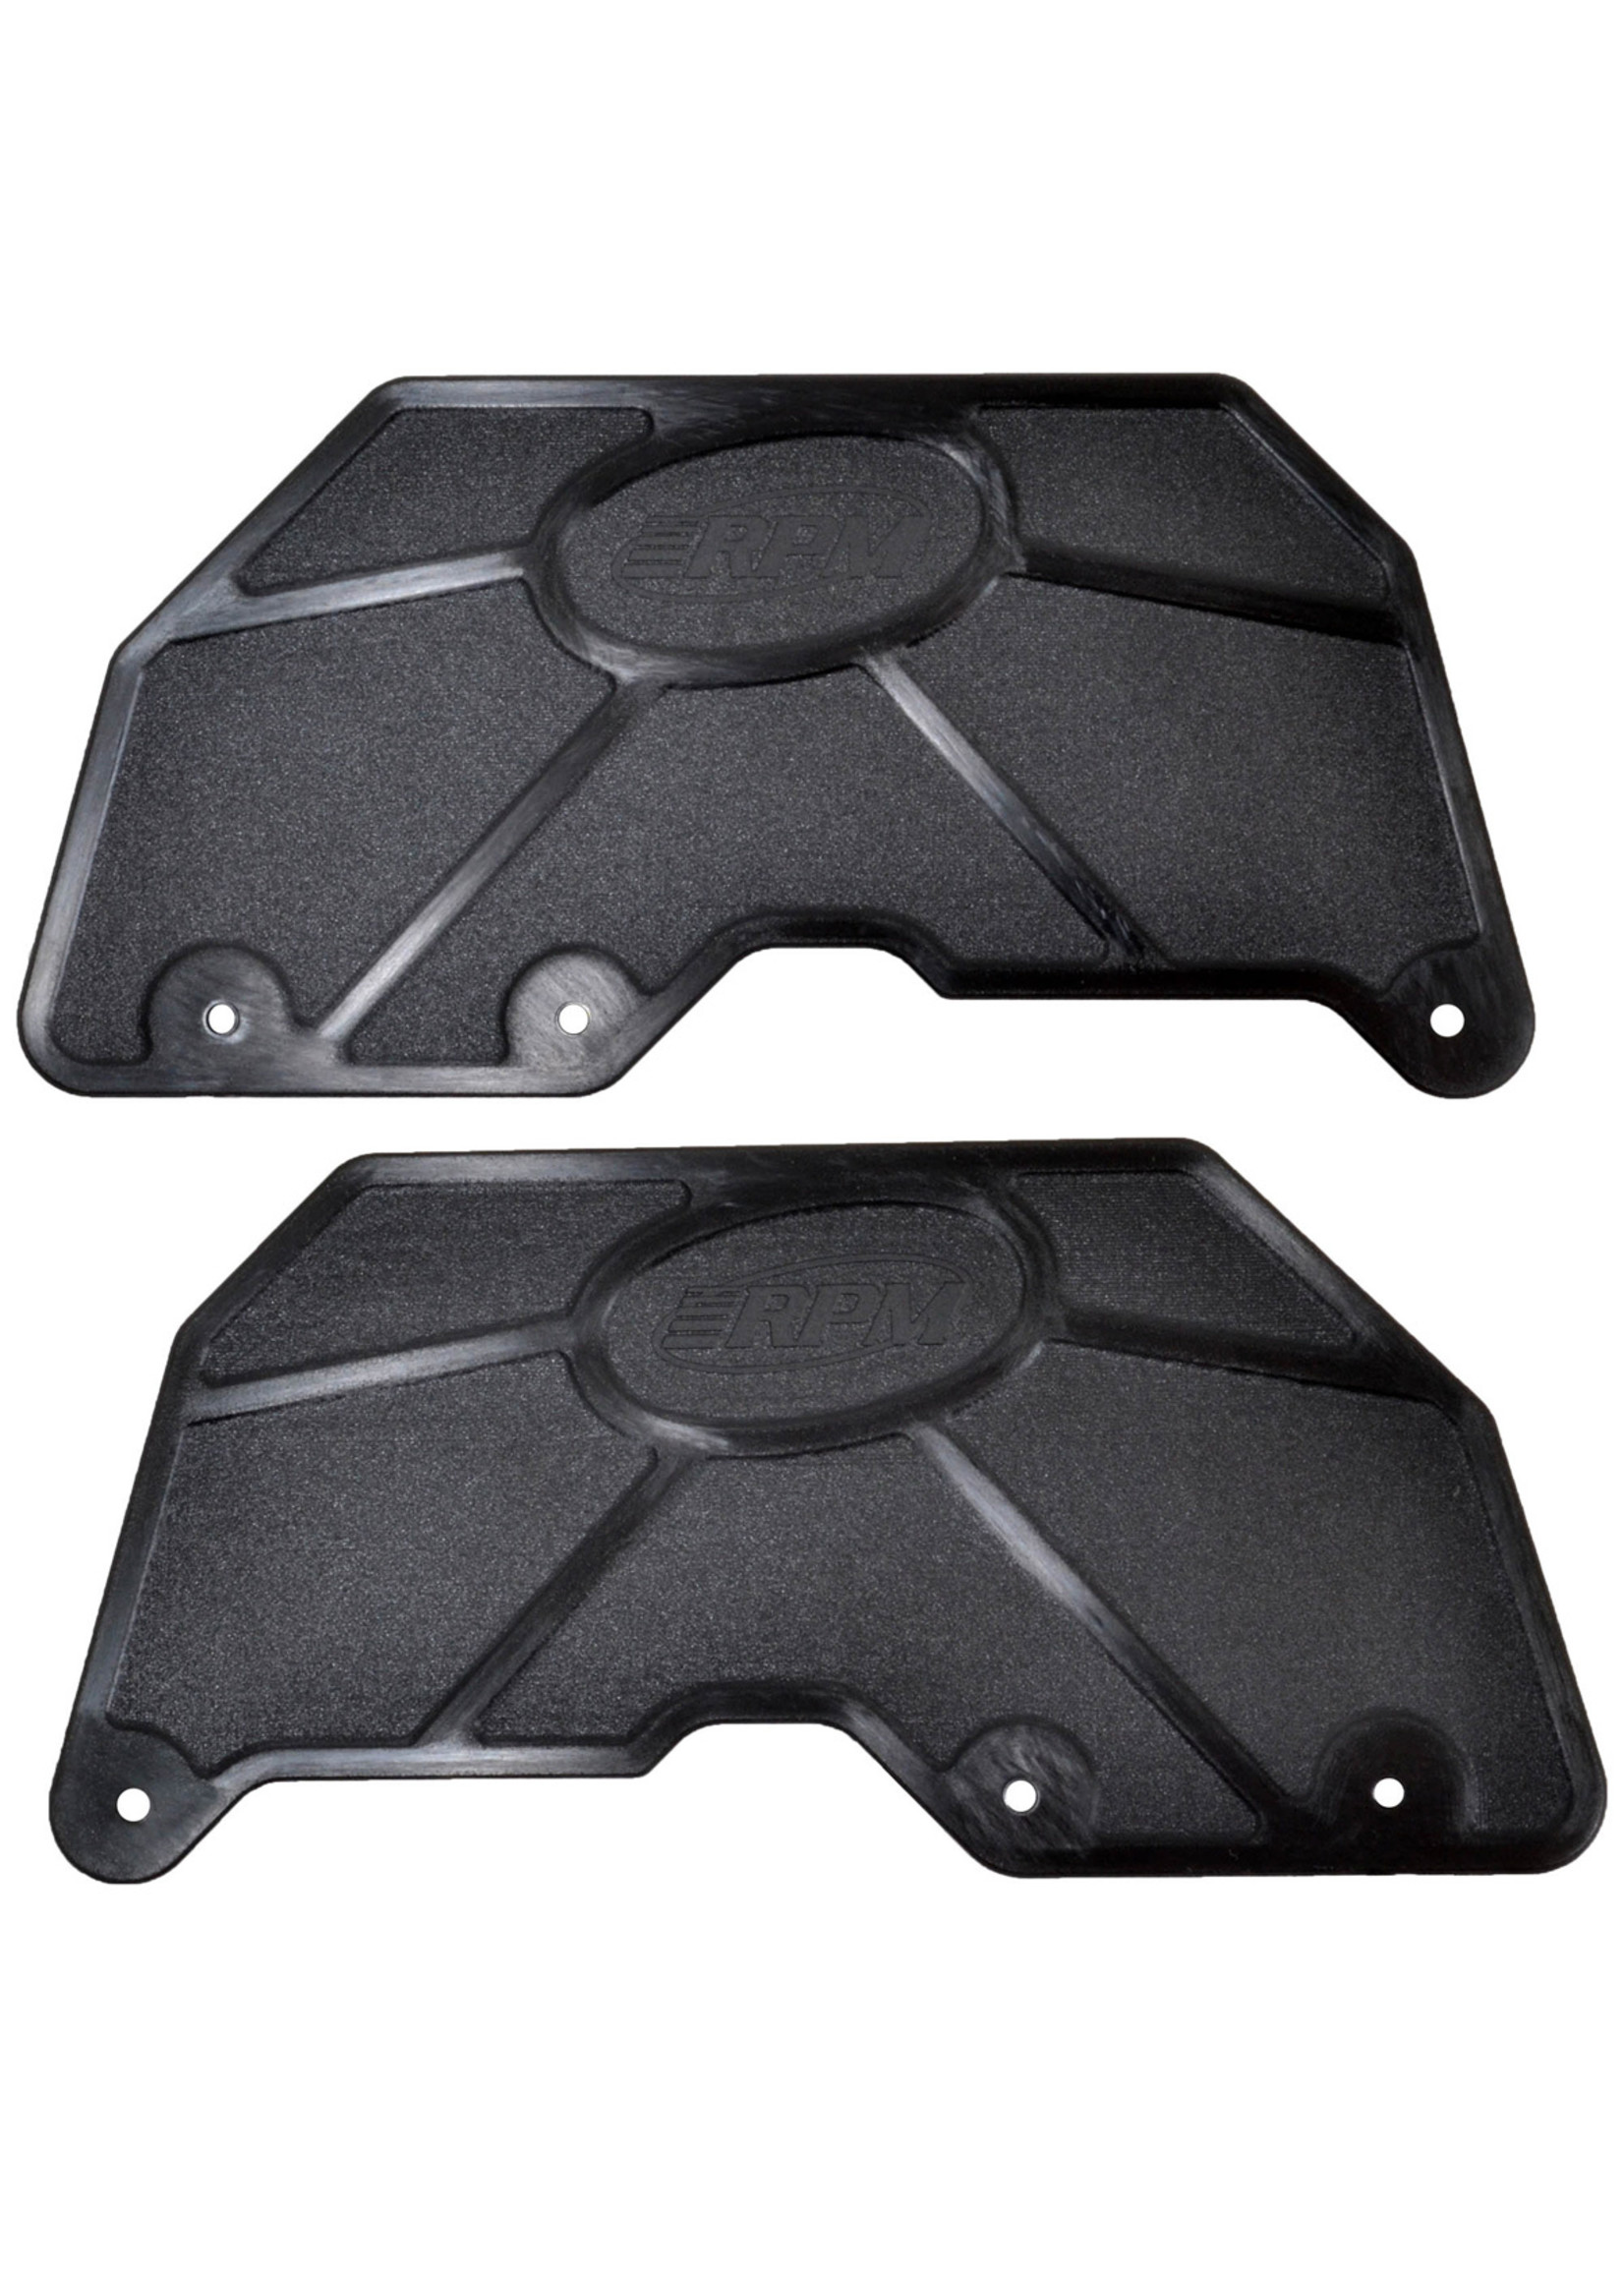 RPM 80642 - Mud Guards for Kraton 8S